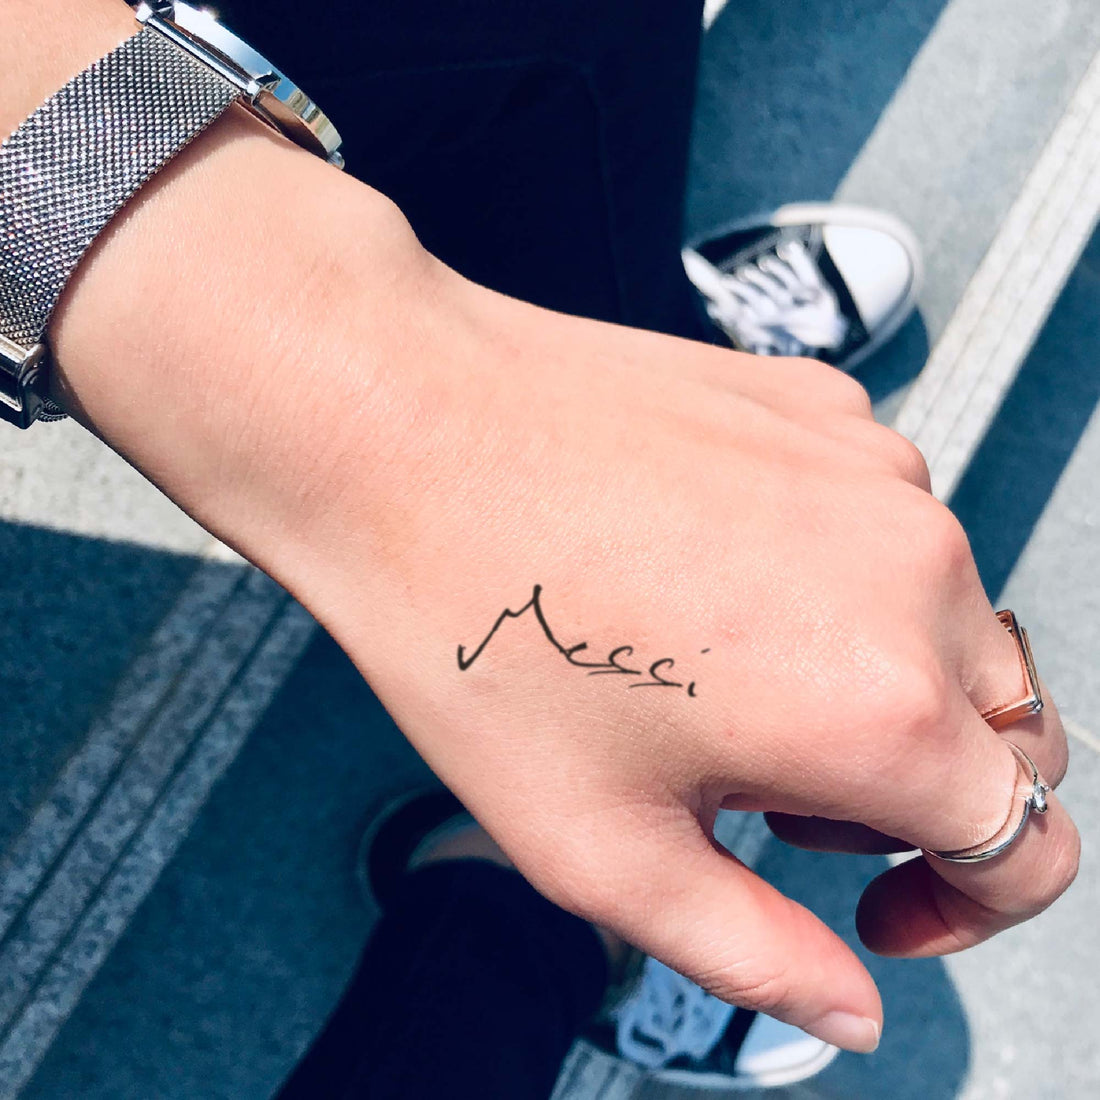 Lionel Messi custom temporary tattoo sticker design idea inspiration meanings removal arm wrist hand words font name signature calligraphy lyrics tour concert outfits merch accessory gift souvenir costumes wear dress up code